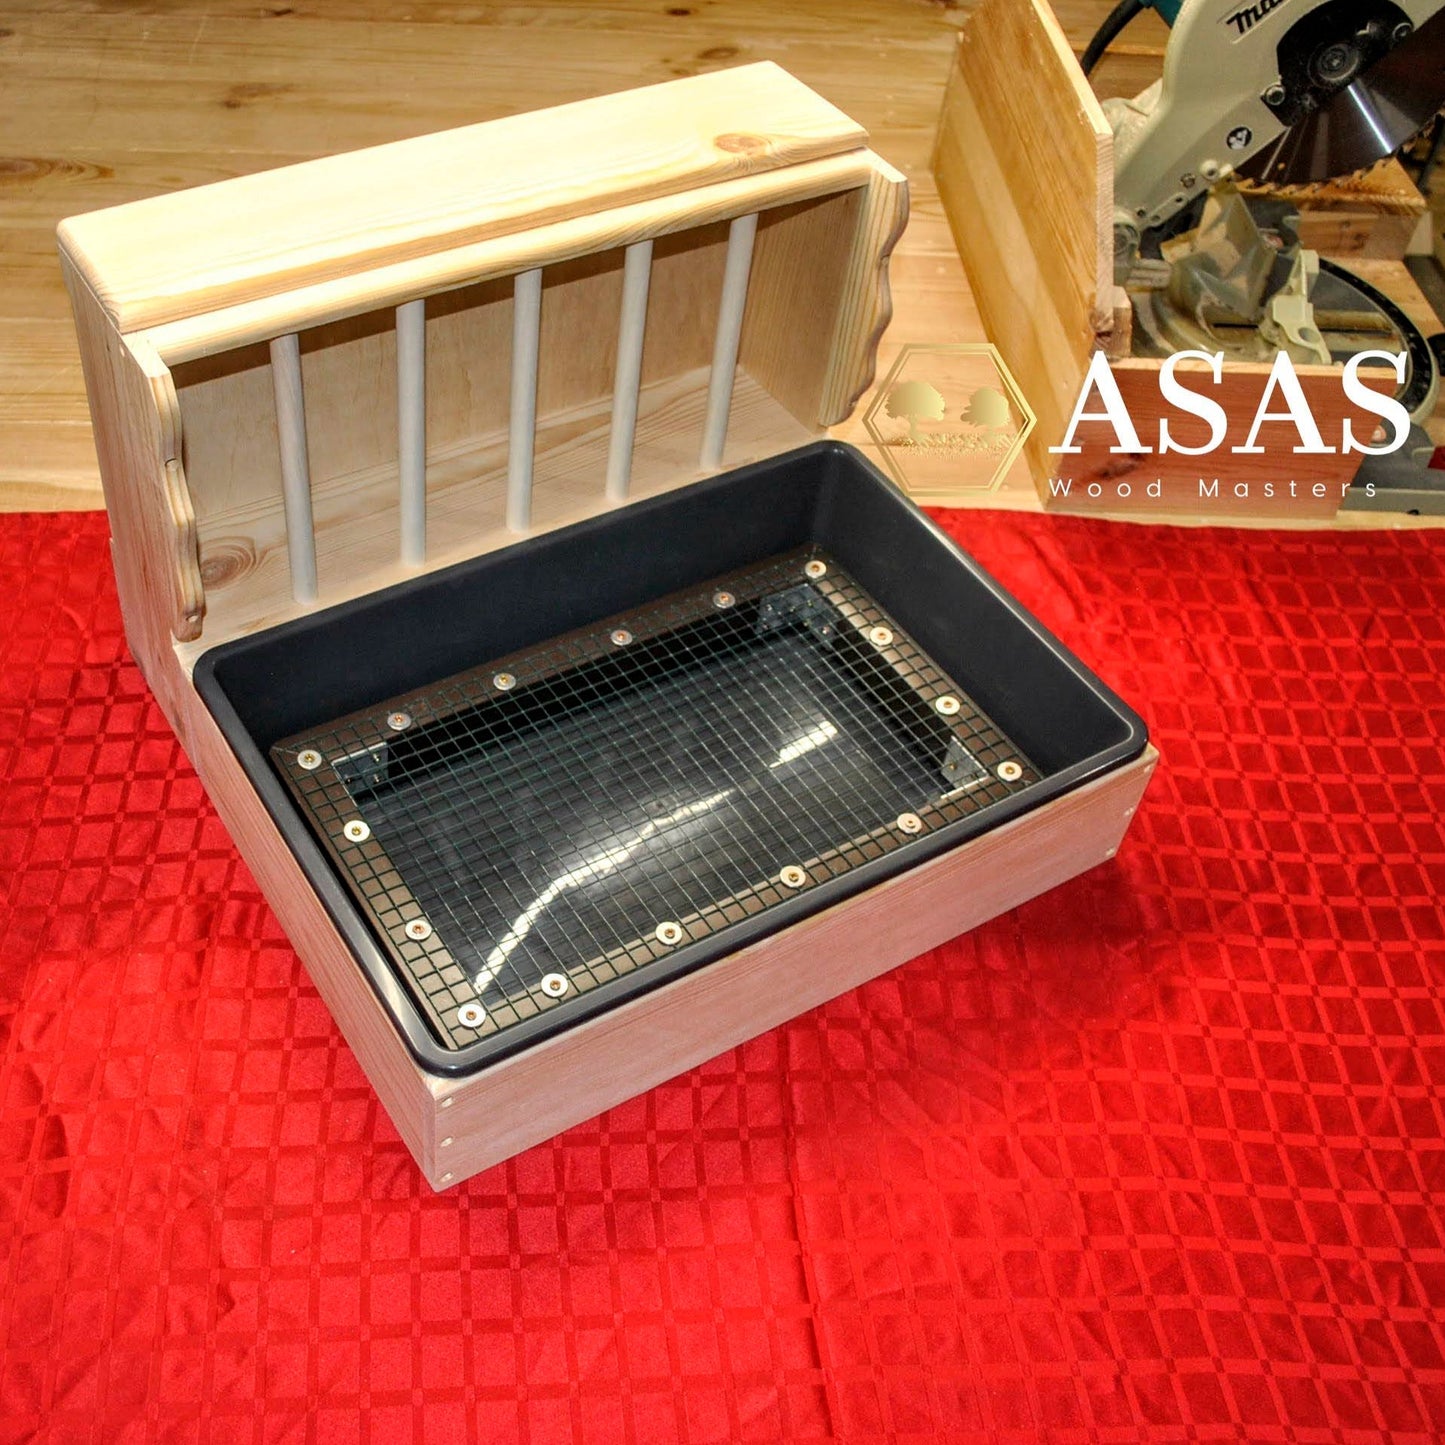 rabbit hay feeder with litter box and wire mesh insert, made by asaswood